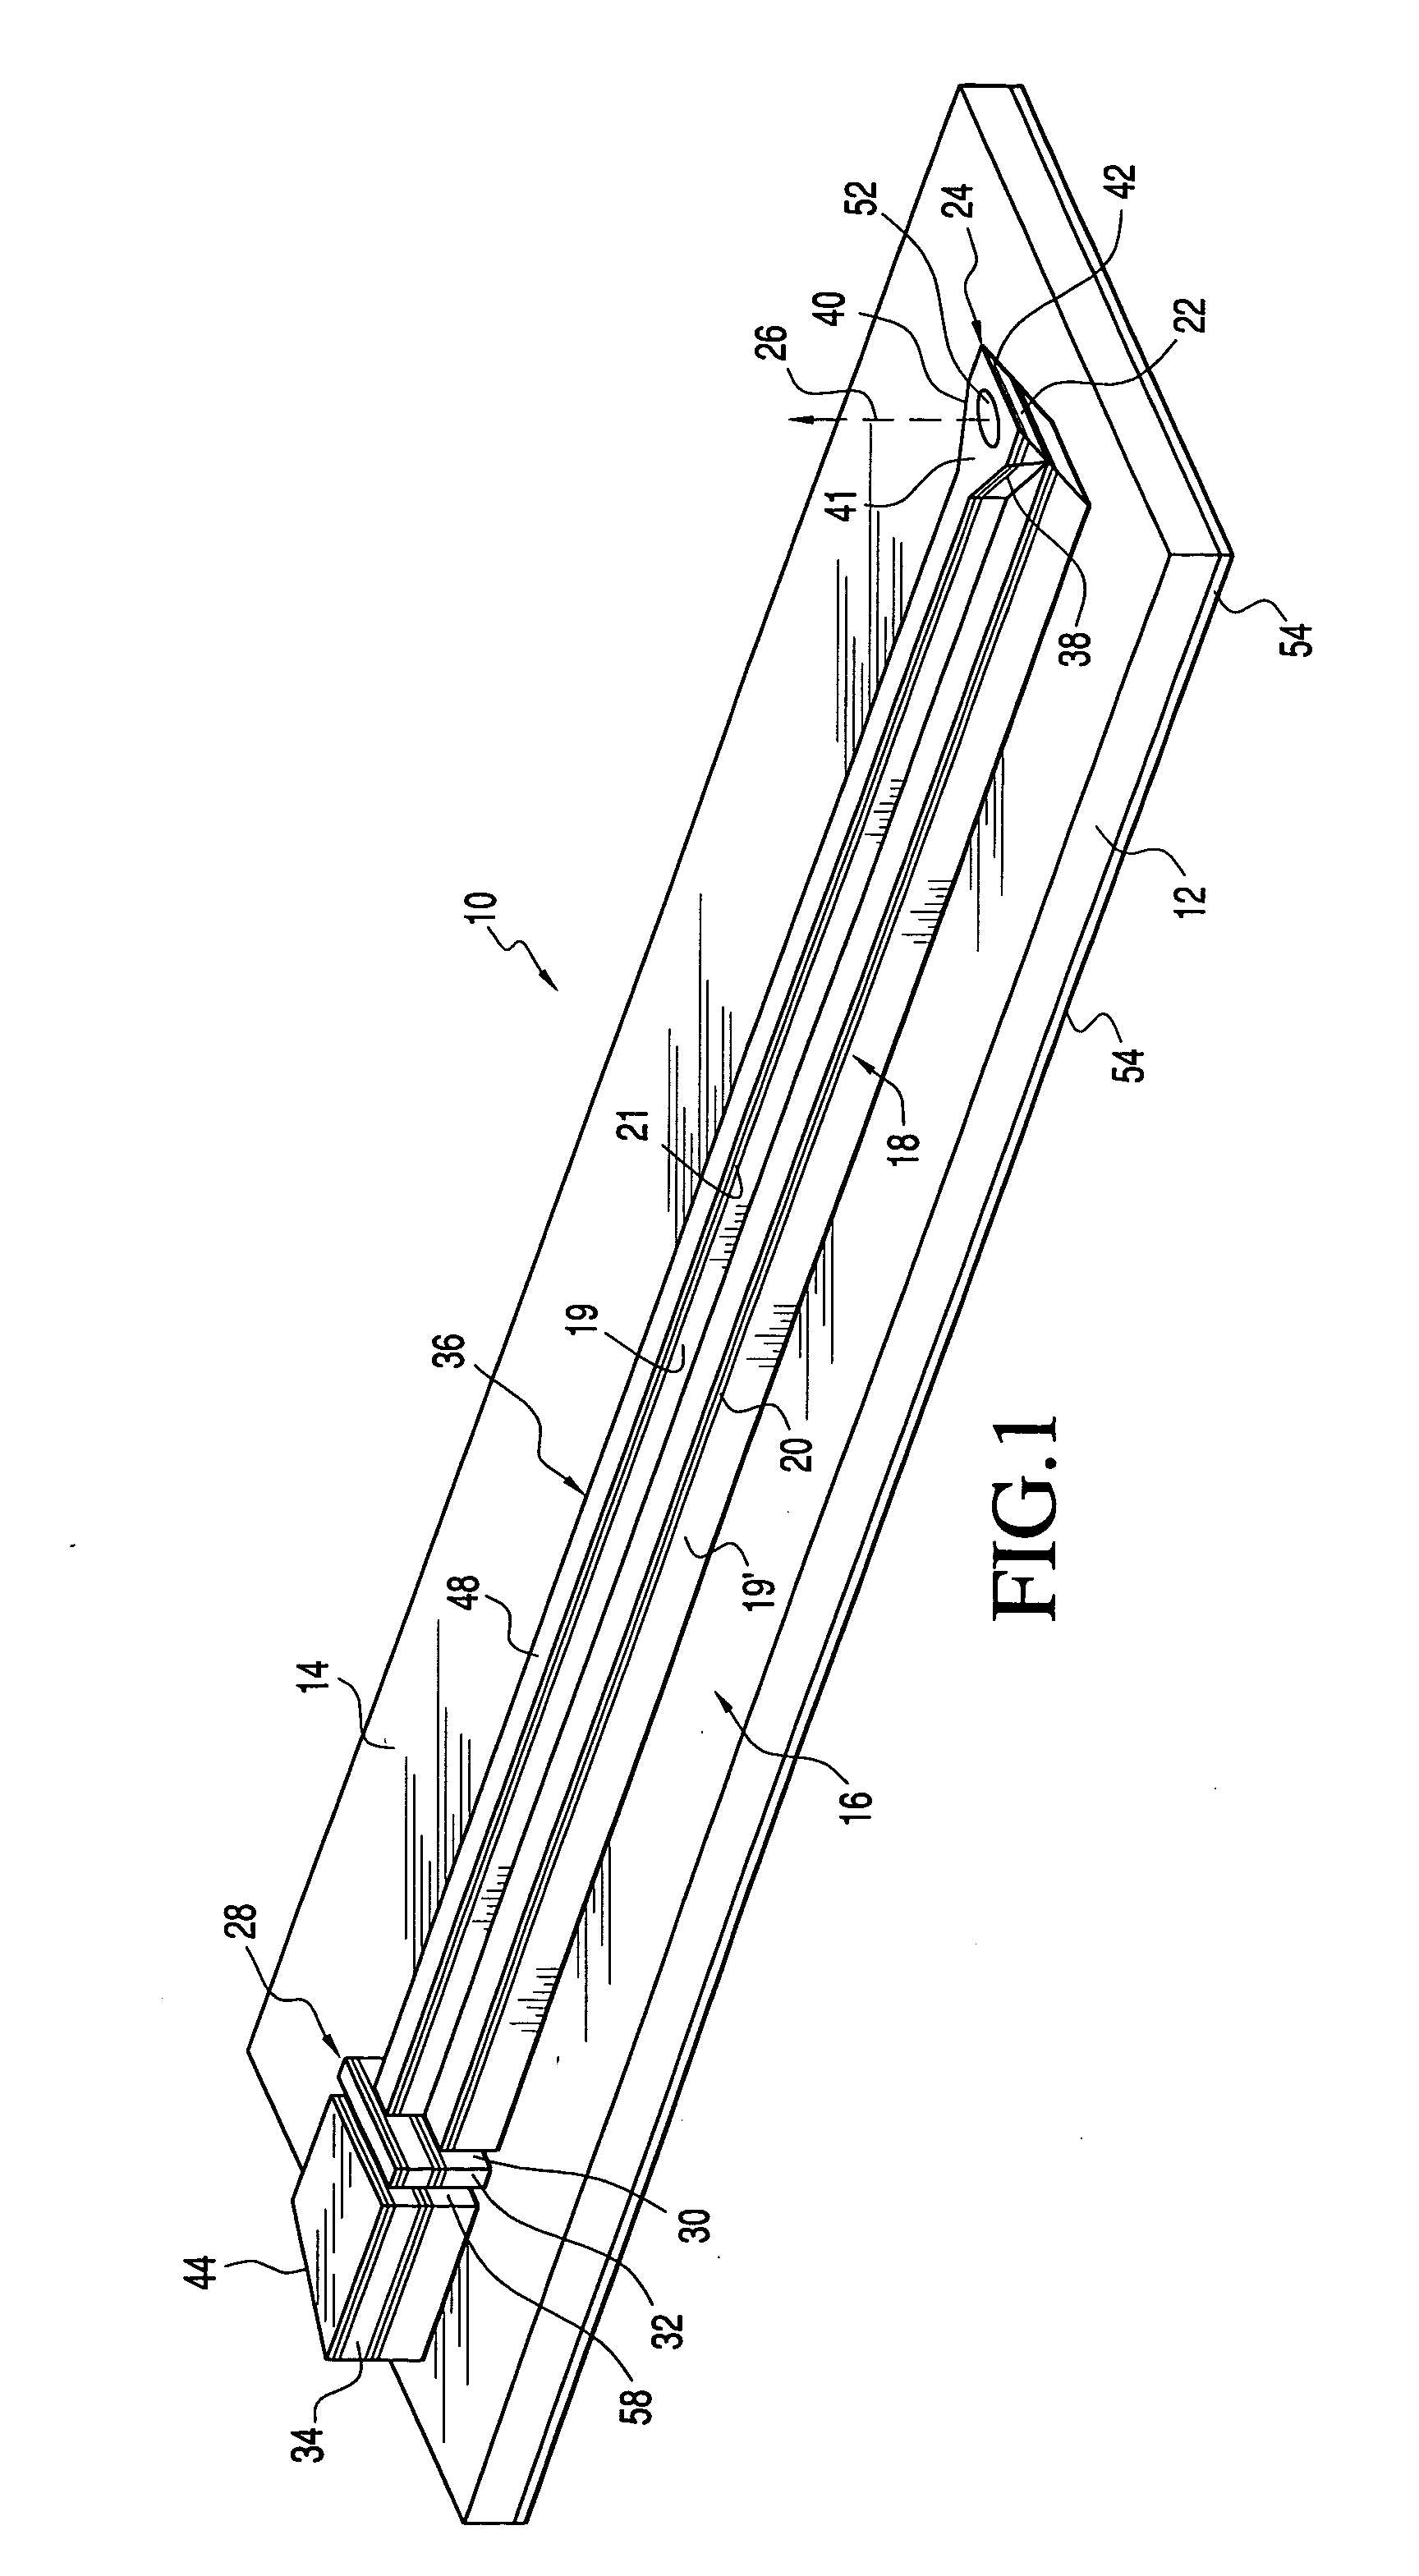 Surface emitting and receiving photonic device with lens